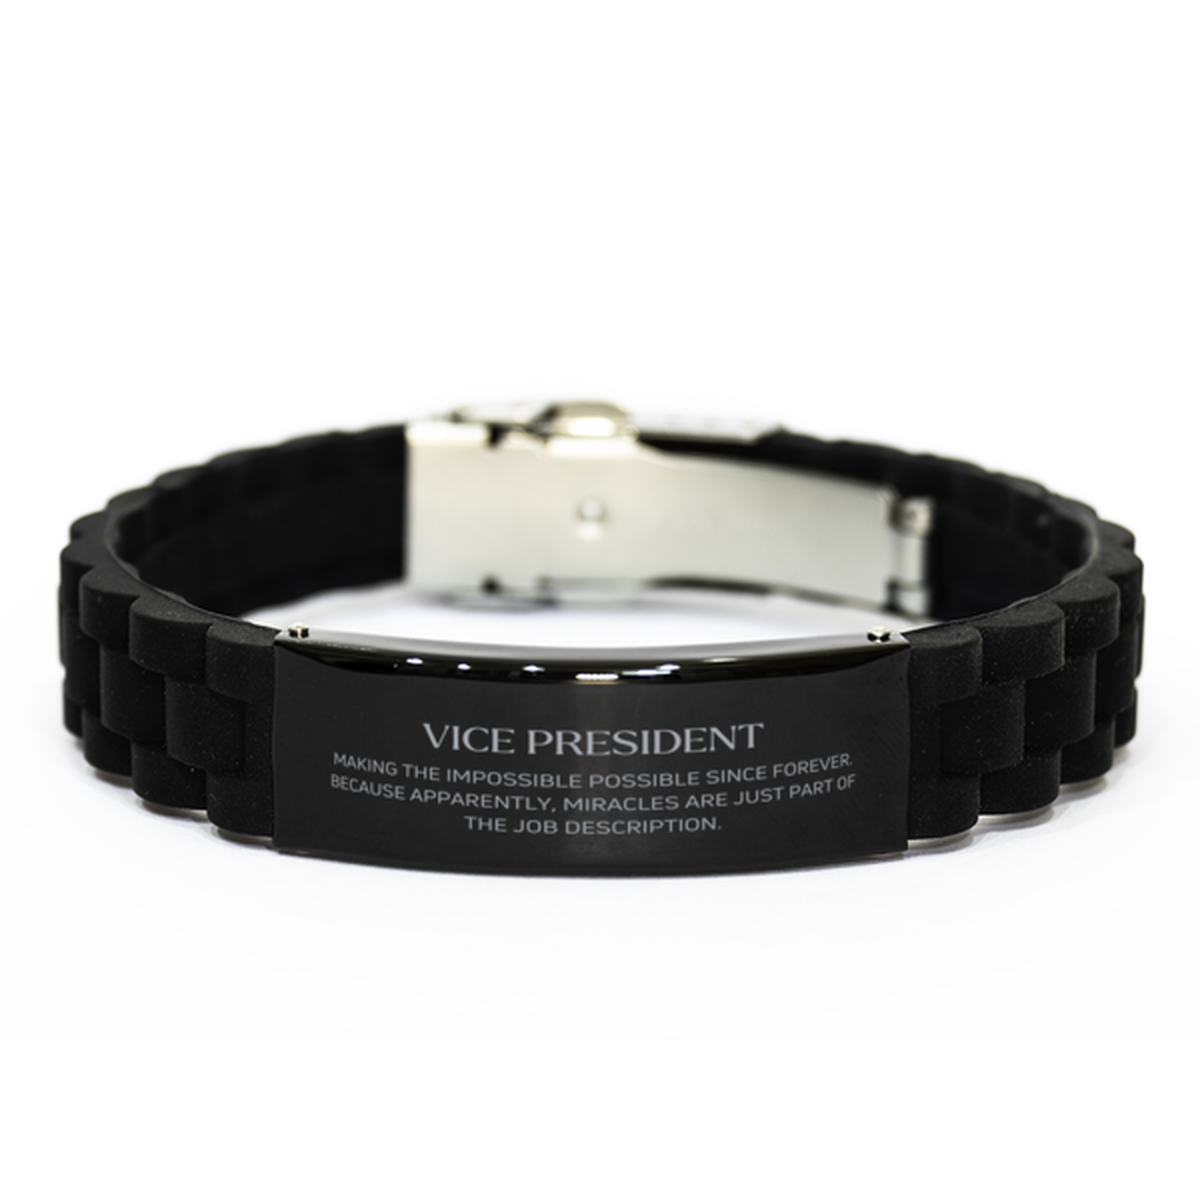 Funny Vice President Gifts, Miracles are just part of the job description, Inspirational Birthday Black Glidelock Clasp Bracelet For Vice President, Men, Women, Coworkers, Friends, Boss